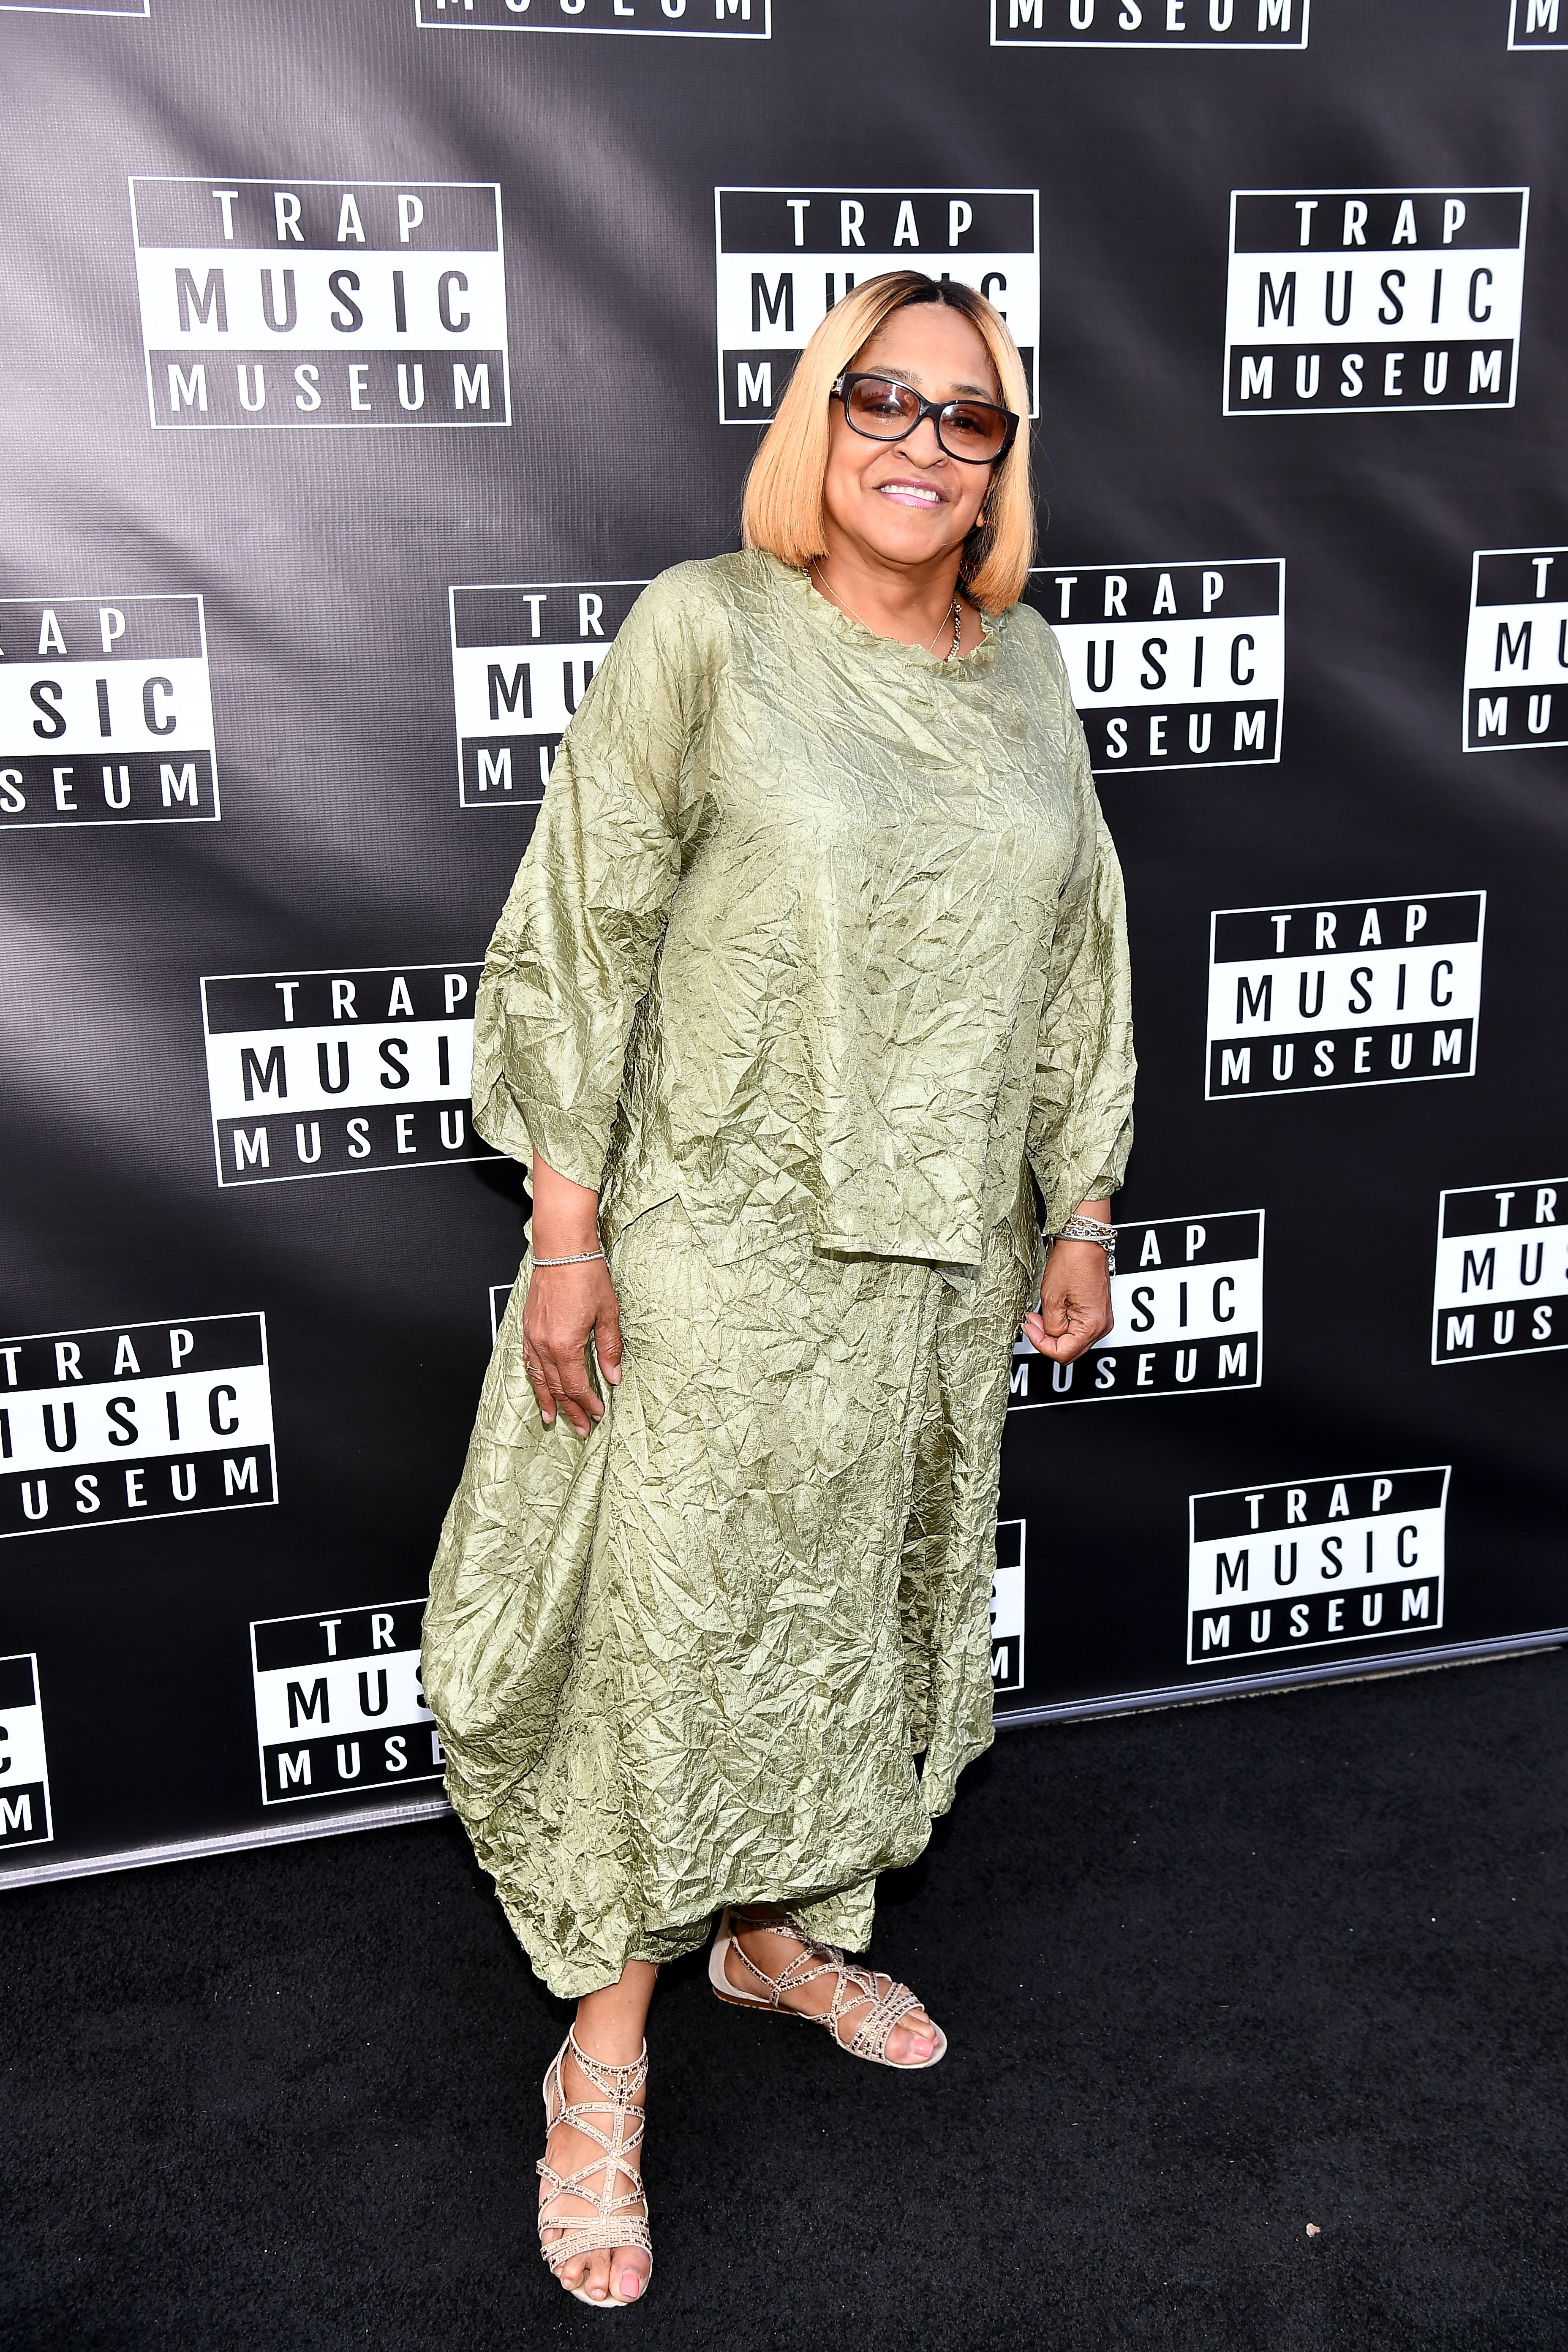 T.I’s sister Precious Harris at the Trap Music Museum attending the Trap Music Museum VIP Preview on 29 September 2018 in Atlanta, Georgia. │Photo: Getty Images 